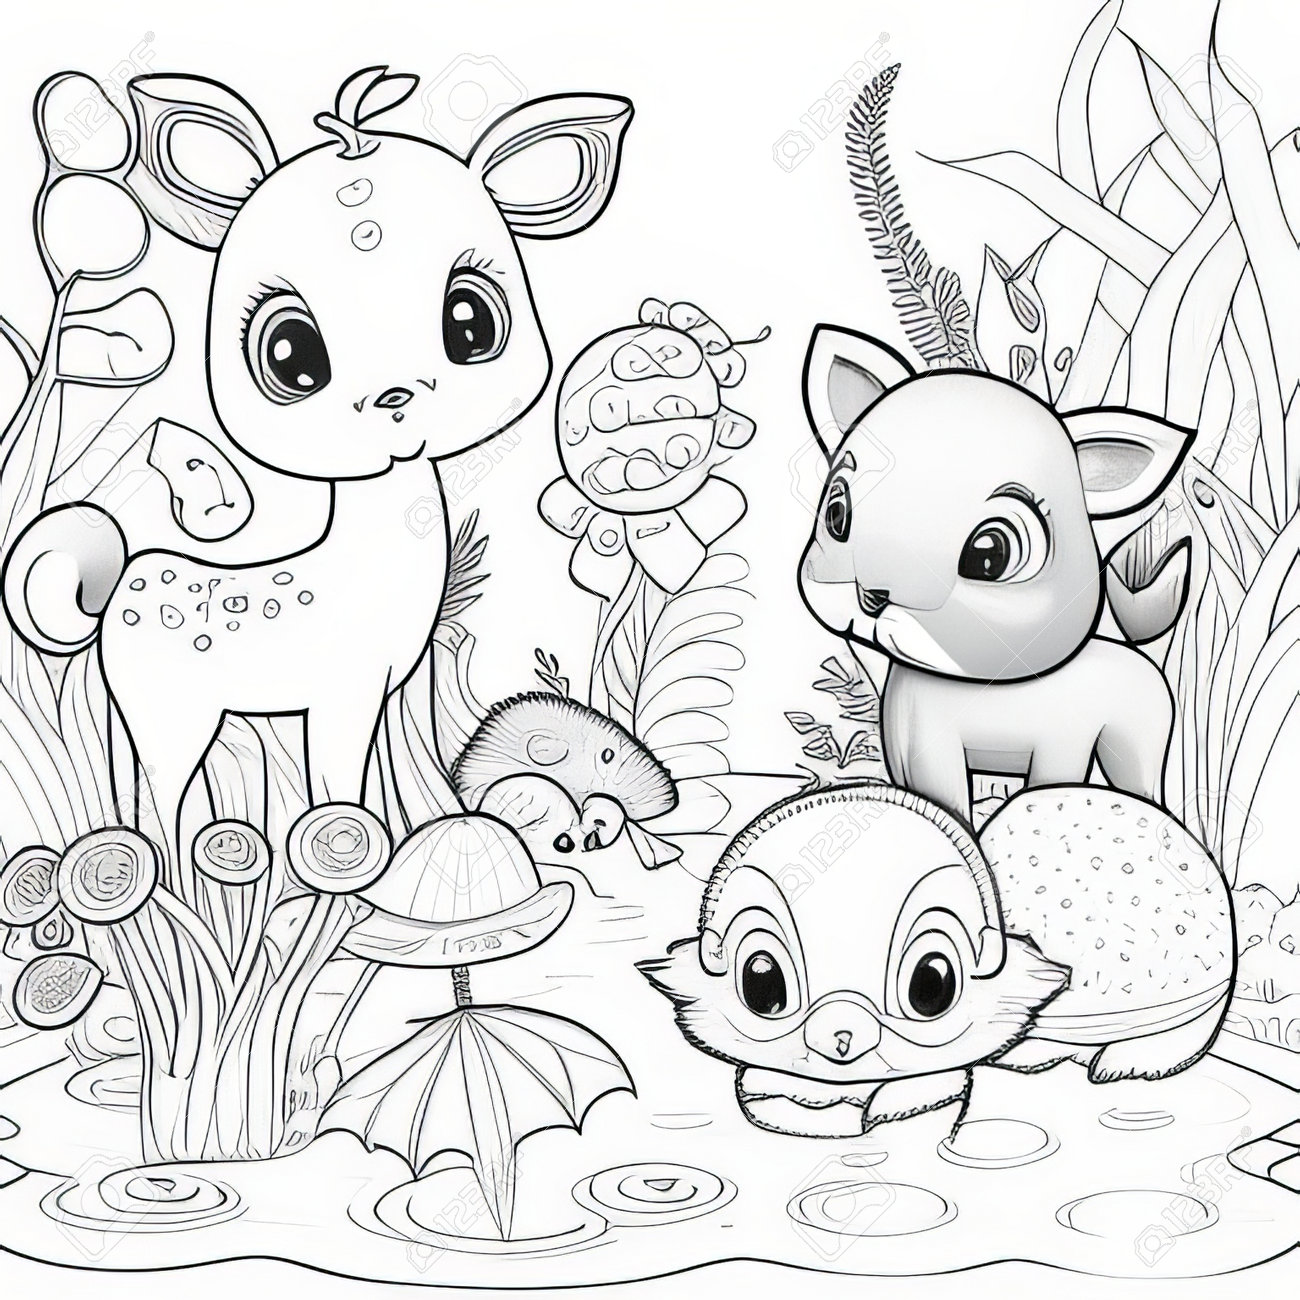 Coloring page outline of cute cartoon animals vector illustration stock photo picture and royalty free image image